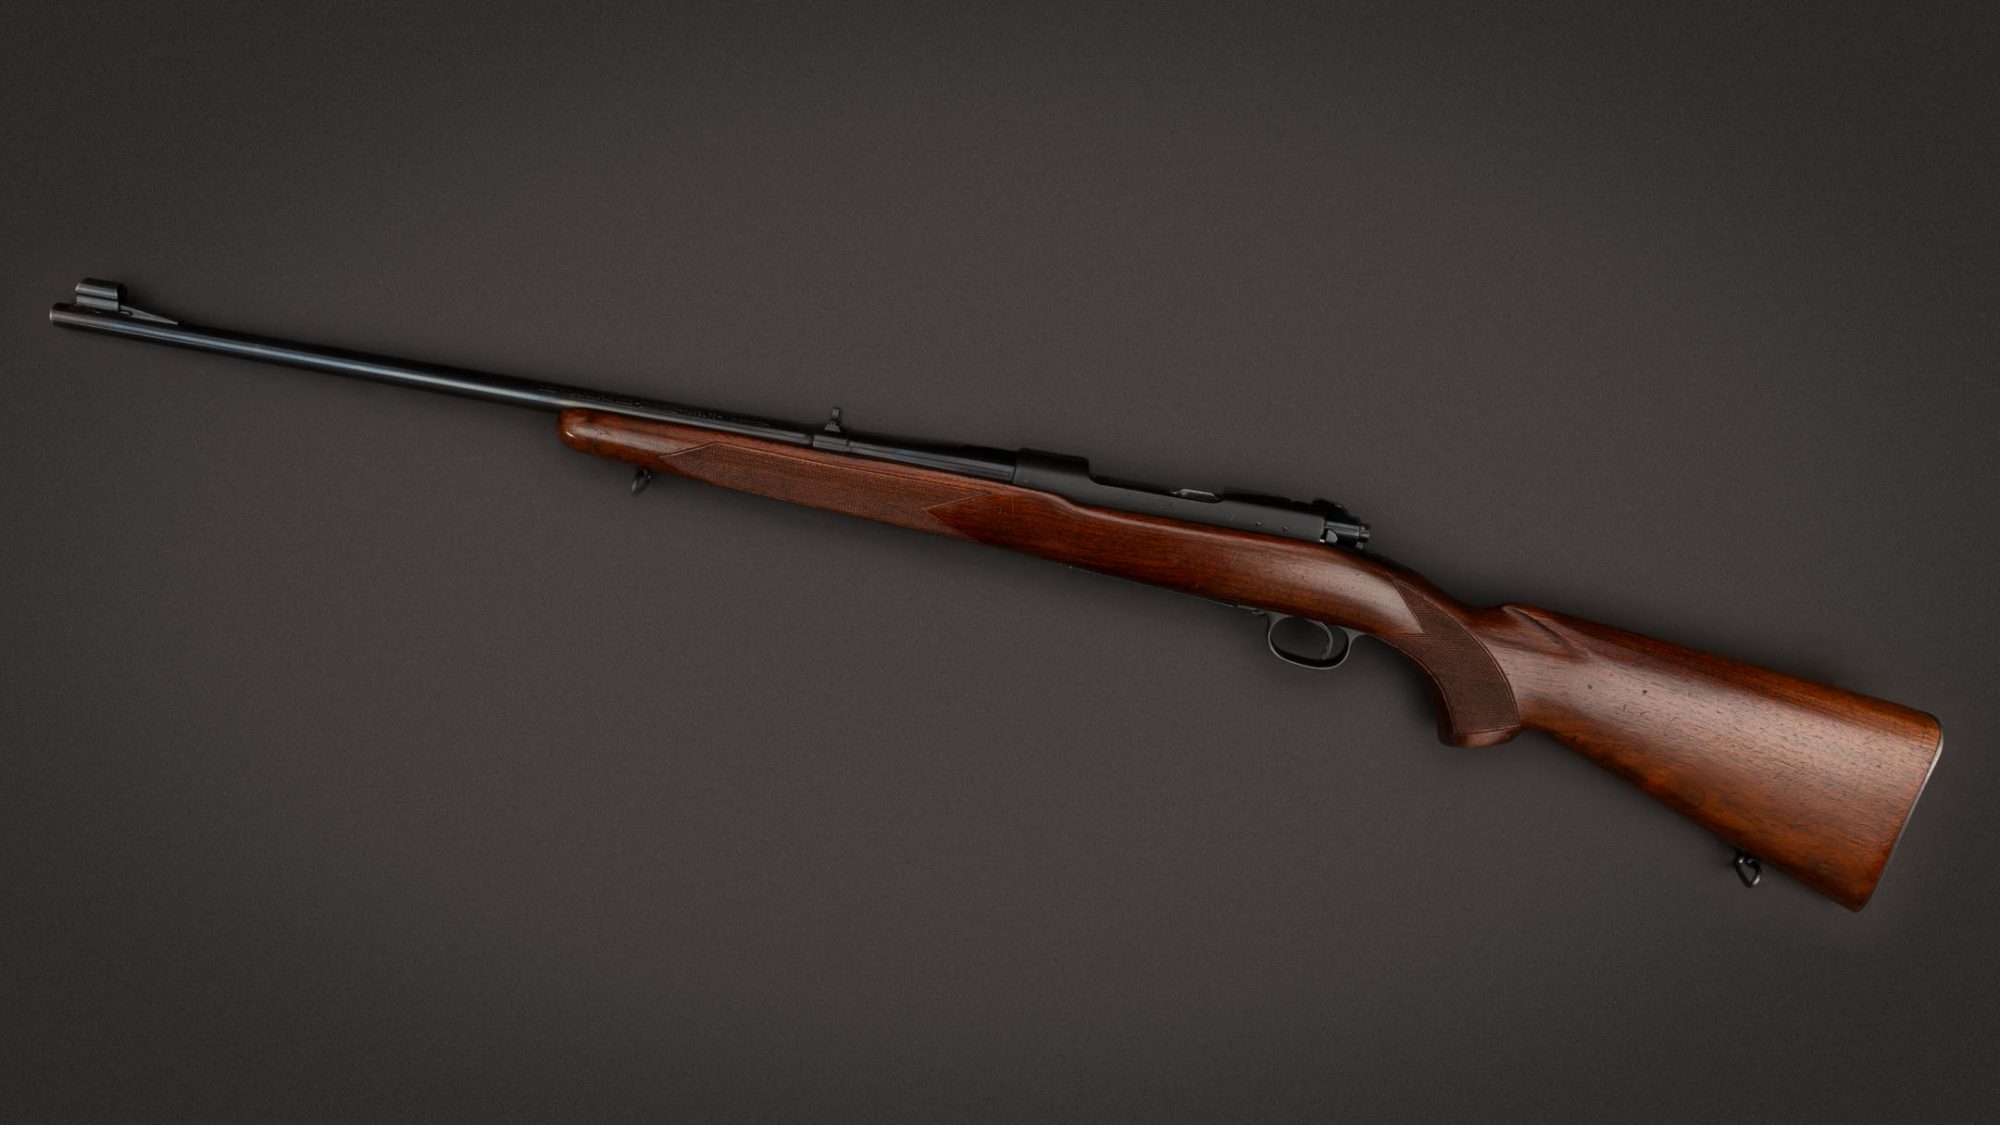 Winchester Model 70 in .30-06 Springfield from 1949, for sale by Turnbull Restoration Co. of Bloomfield, NY